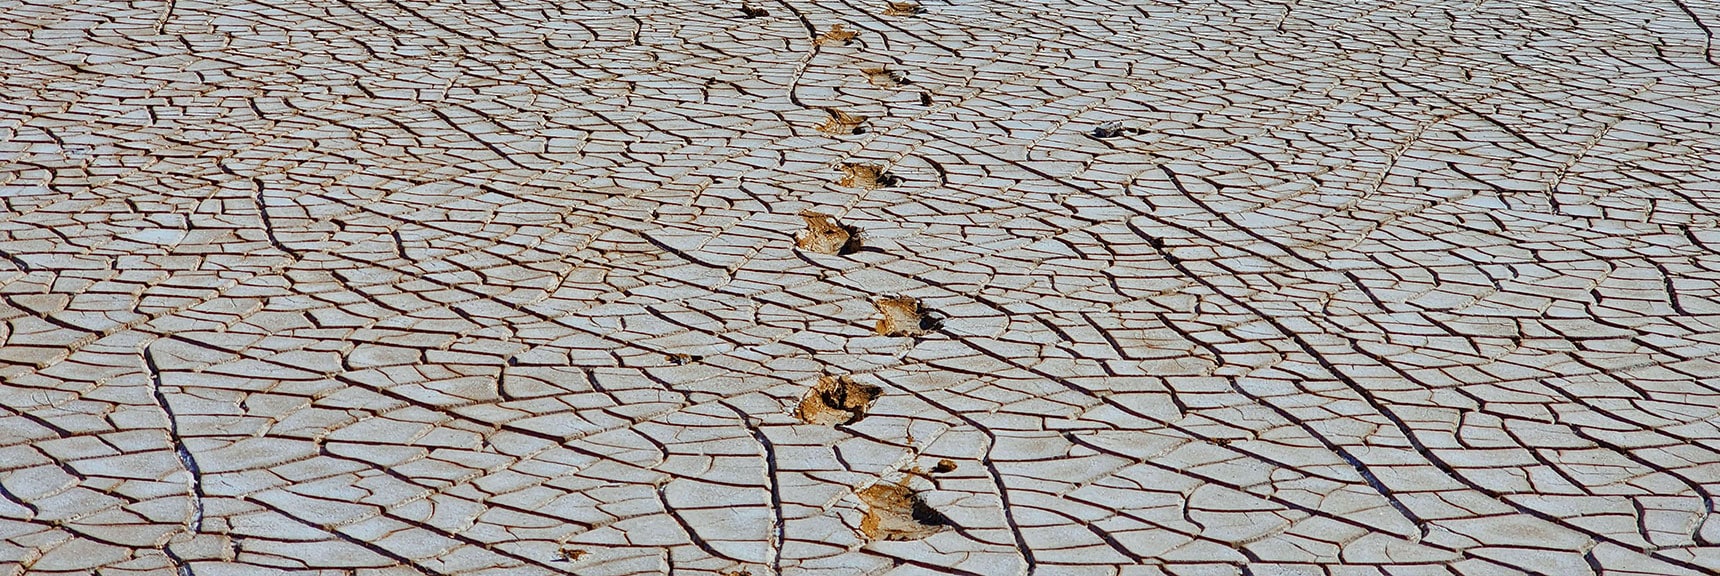 More Cool Geometric Shapes as Soil and Salts Dry Following Yesterday's Rain | Death Valley Crossing | Death Valley National Park, California | David Smith | LasVegasAreaTrails.com